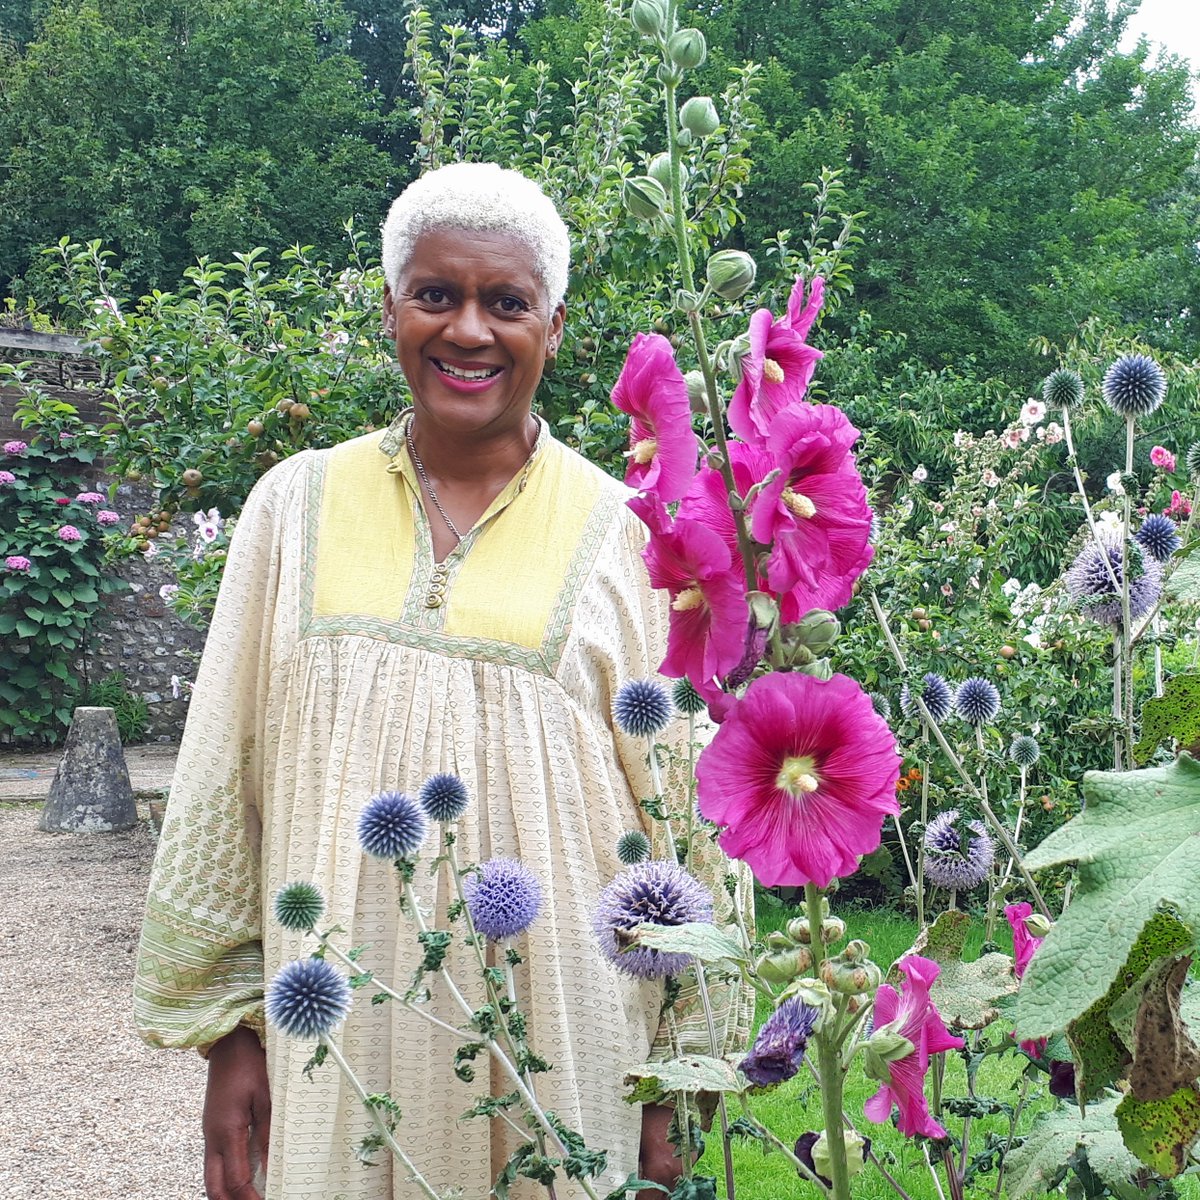 The garden at the @CharlestonTrust was treated as a living canvas by artists Vanessa Bell and Duncan Grant who filled it with flowers they loved to paint. Join Arit tonight at 8pm on @BBCTwo to find out more 🙂 🌸 #GardenersWorld #Gardening #FlowersOnFriday #ArtHistory